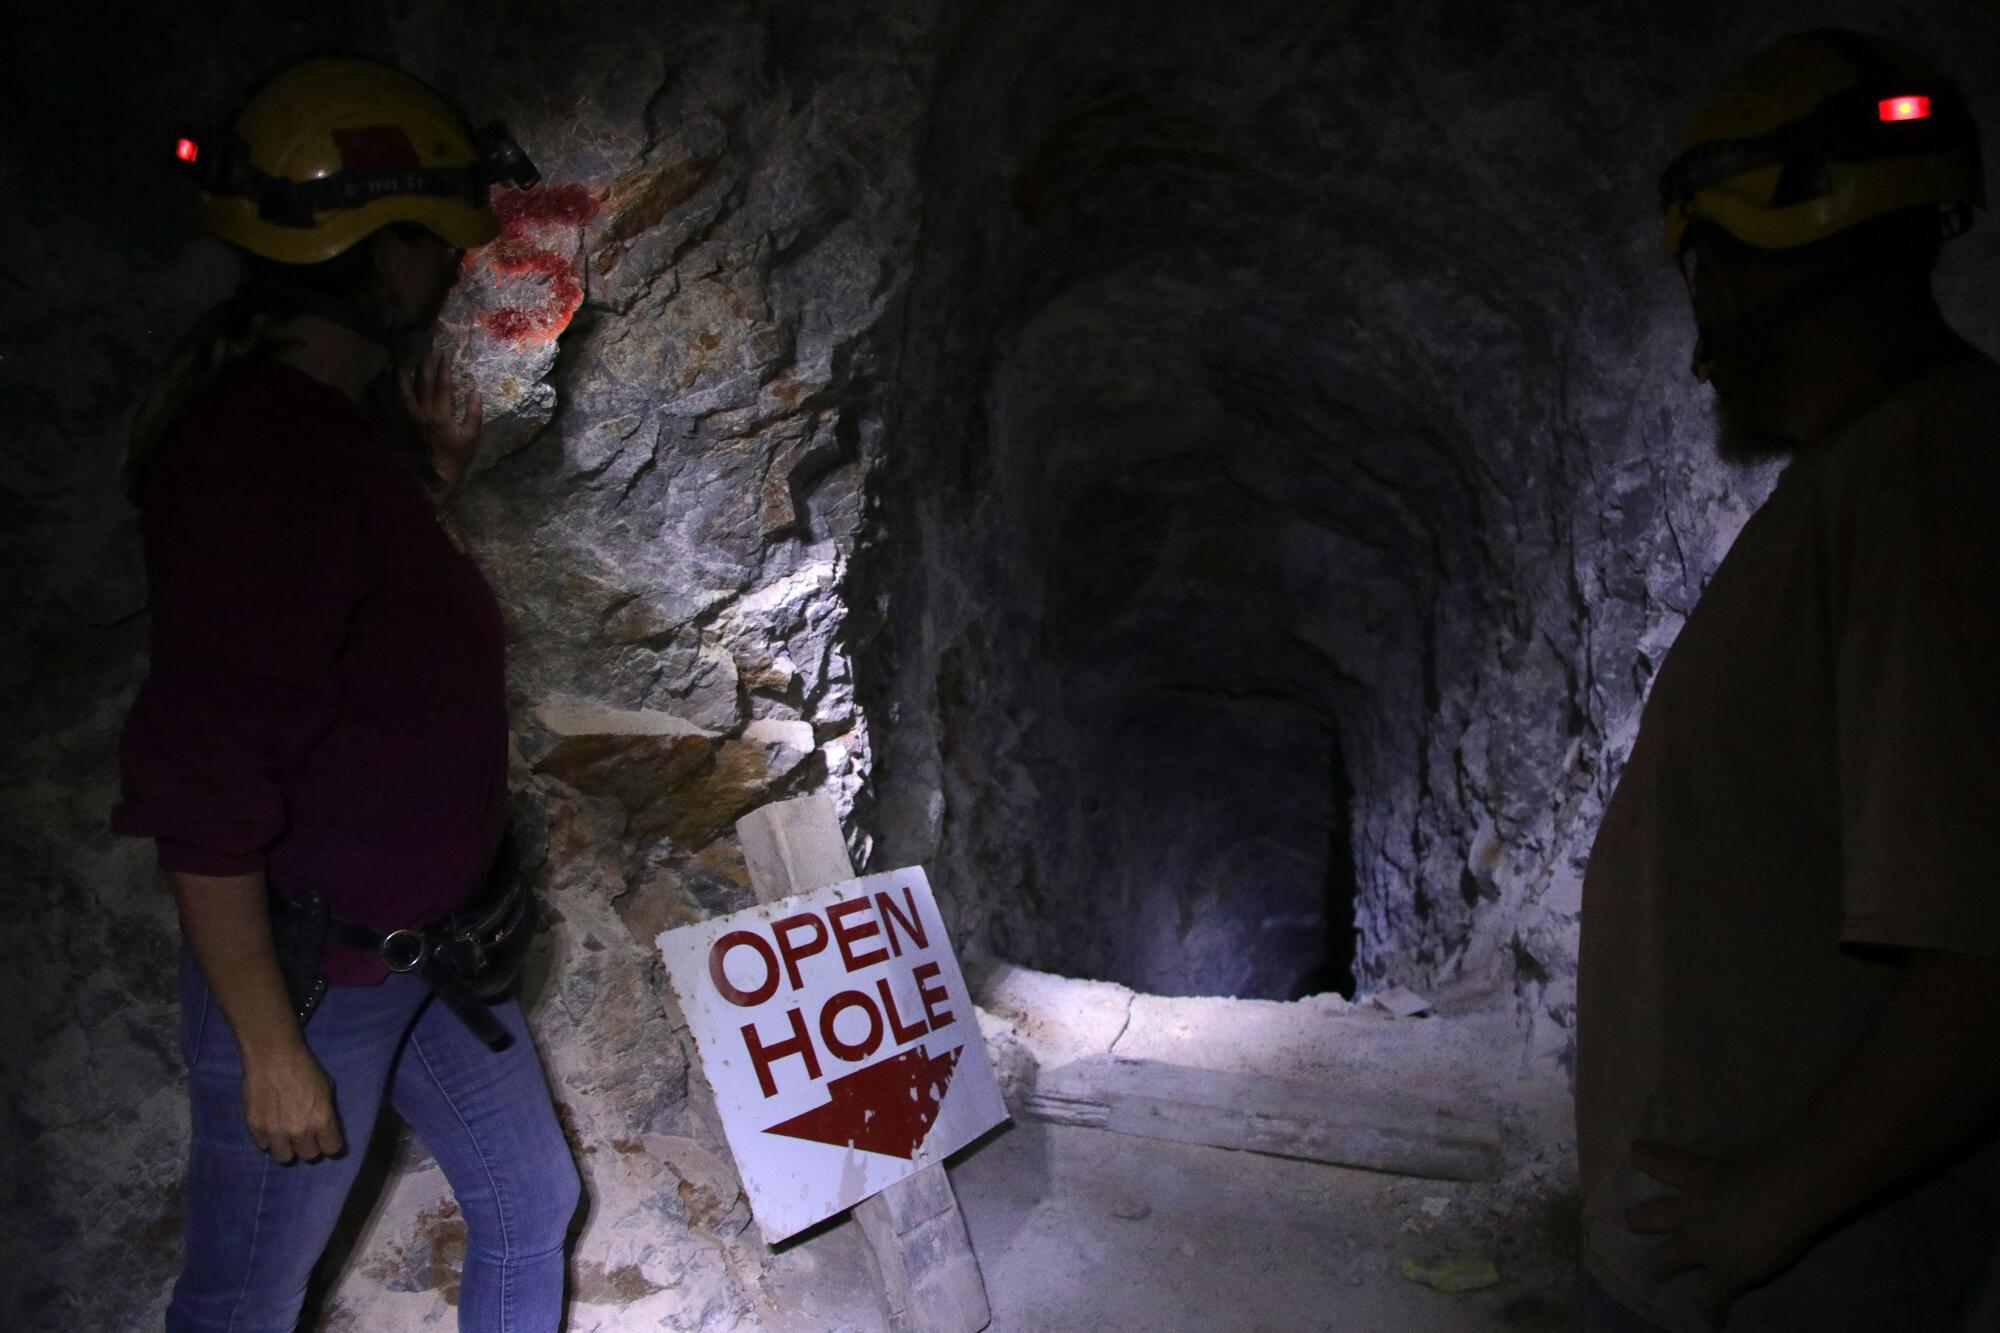 A chasm inside a cave, with a sign reading "OPEN HOLE" and an arrow pointing down.